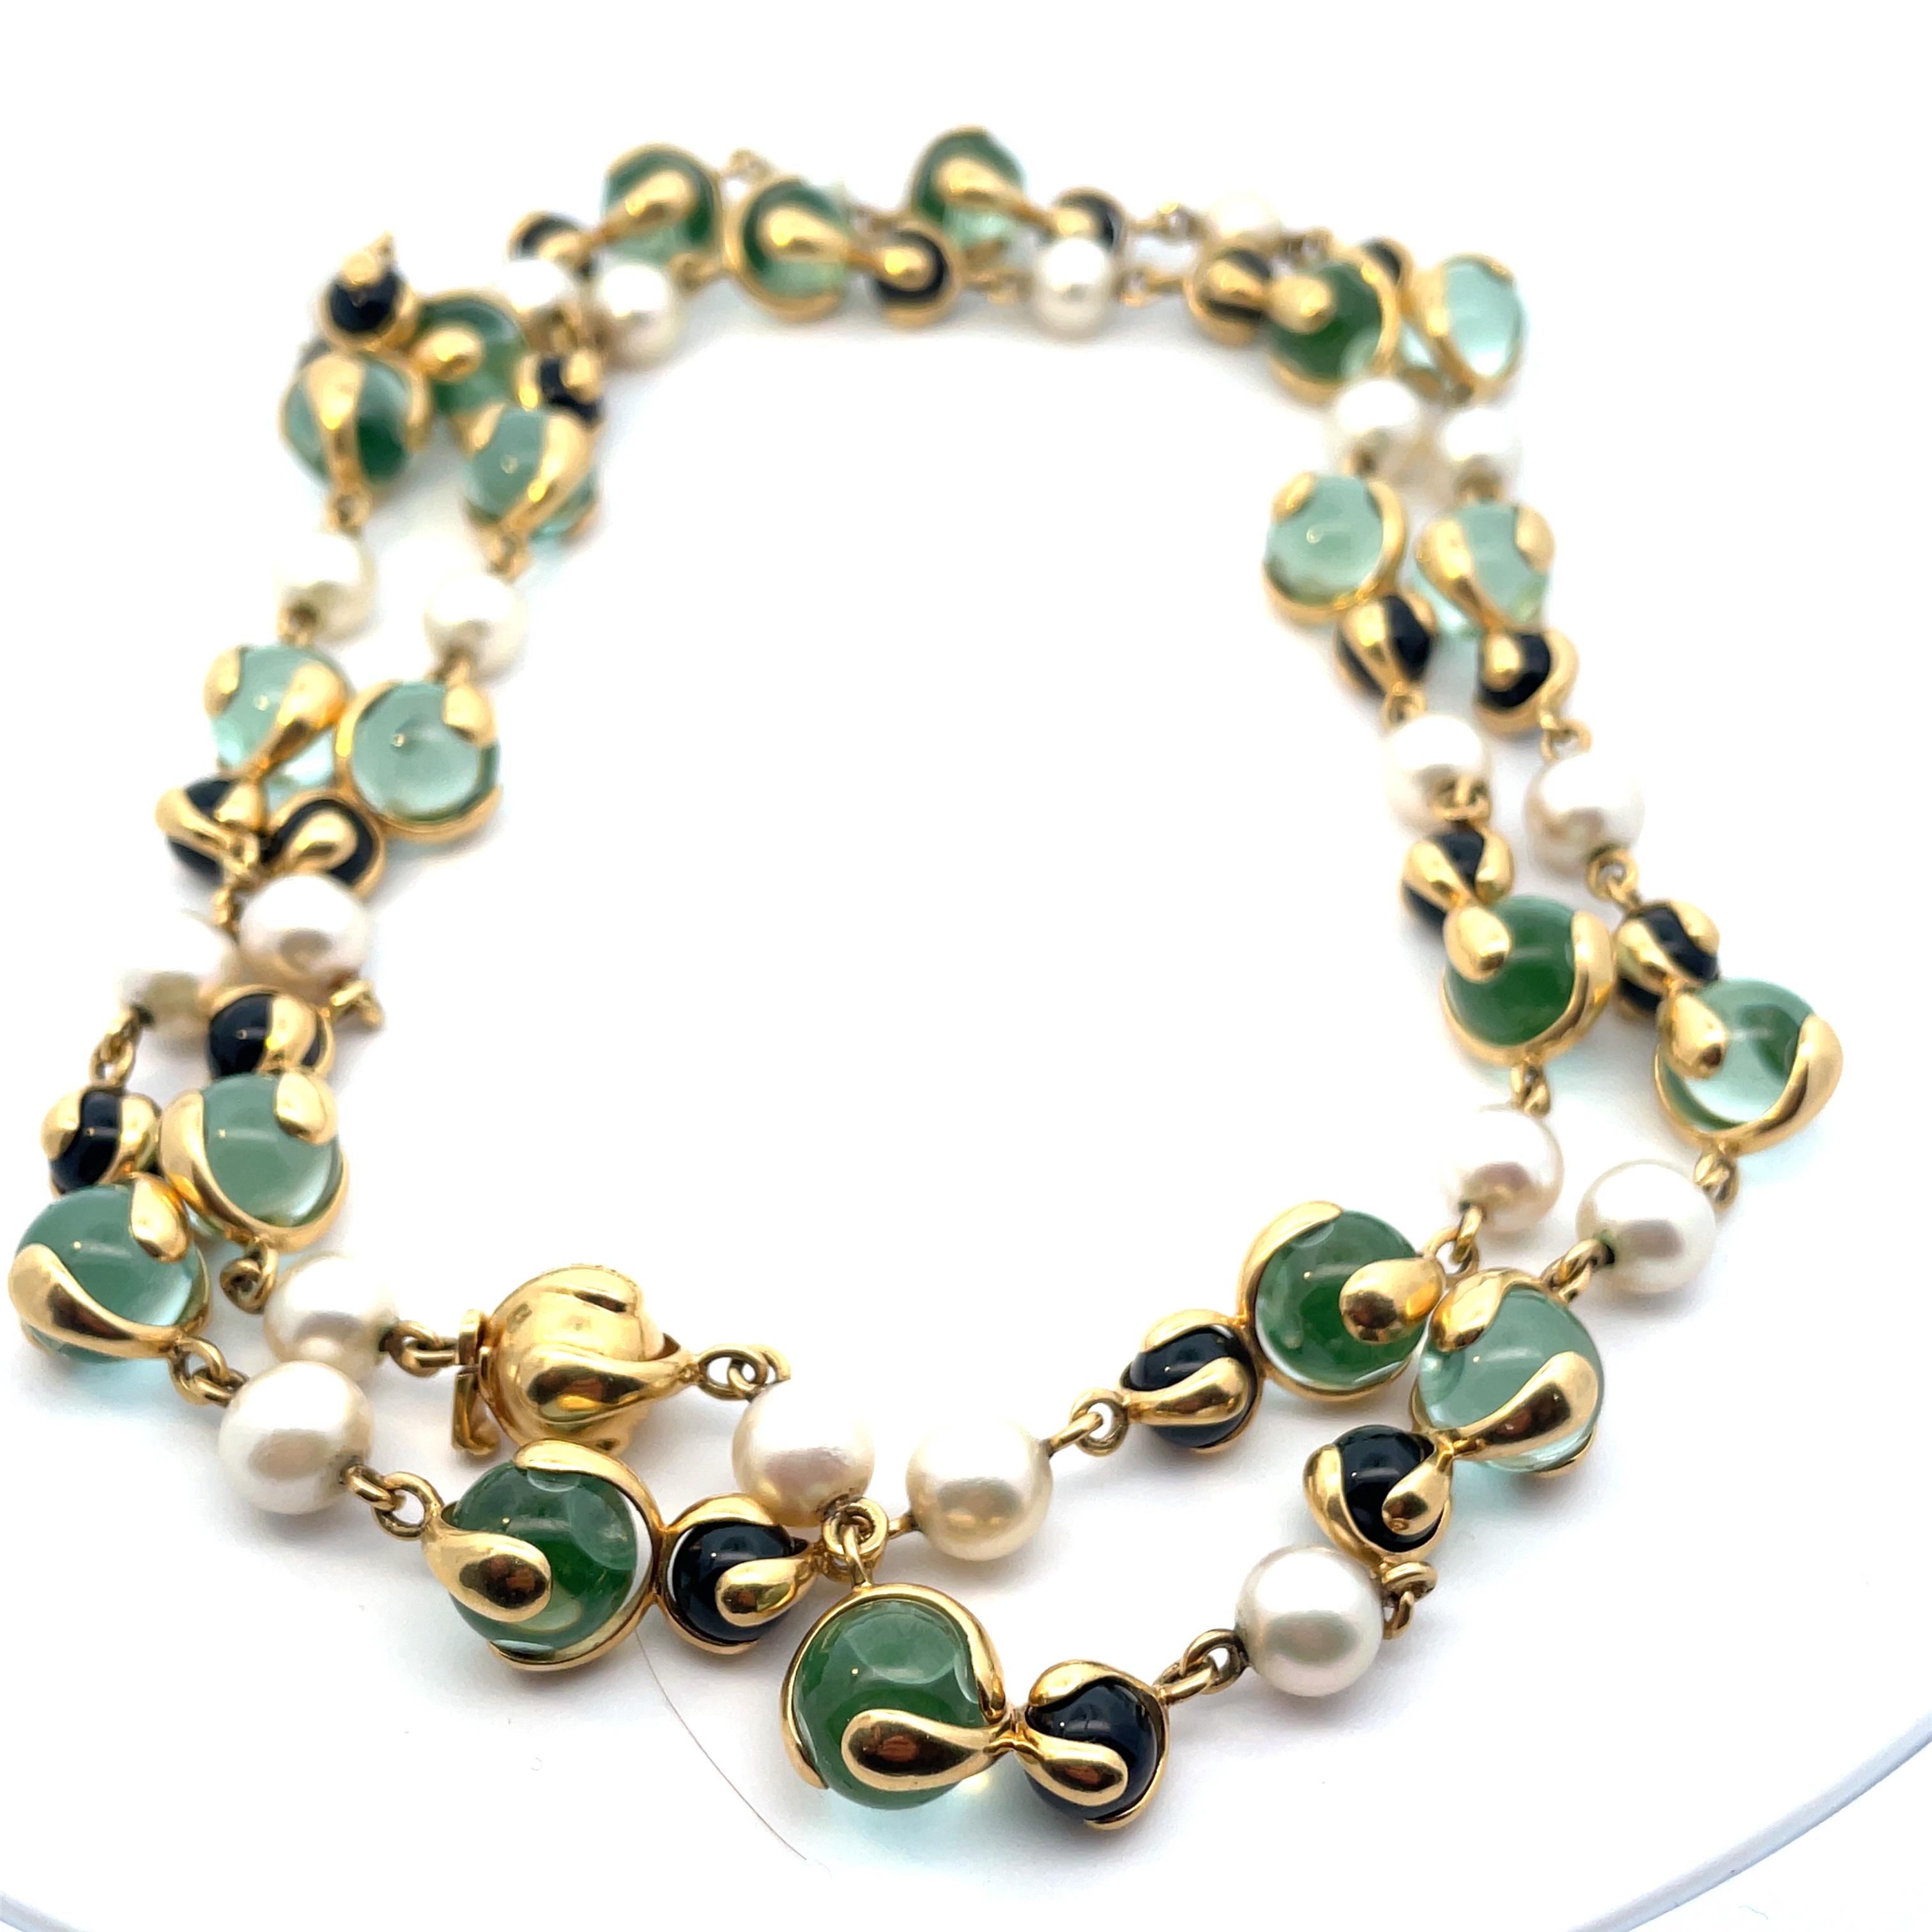 Vintage Long 18k gold necklace by Marina B, with 10.5 mm Tourmaline, 7mm onyx and 8mm pearls. Necklace is 84 cm long. Marked: Marina B, MB, Italy, 750. Weight - 131,5 grams.
Please note we have another one in Blue Beads and can be purchase togheter.
